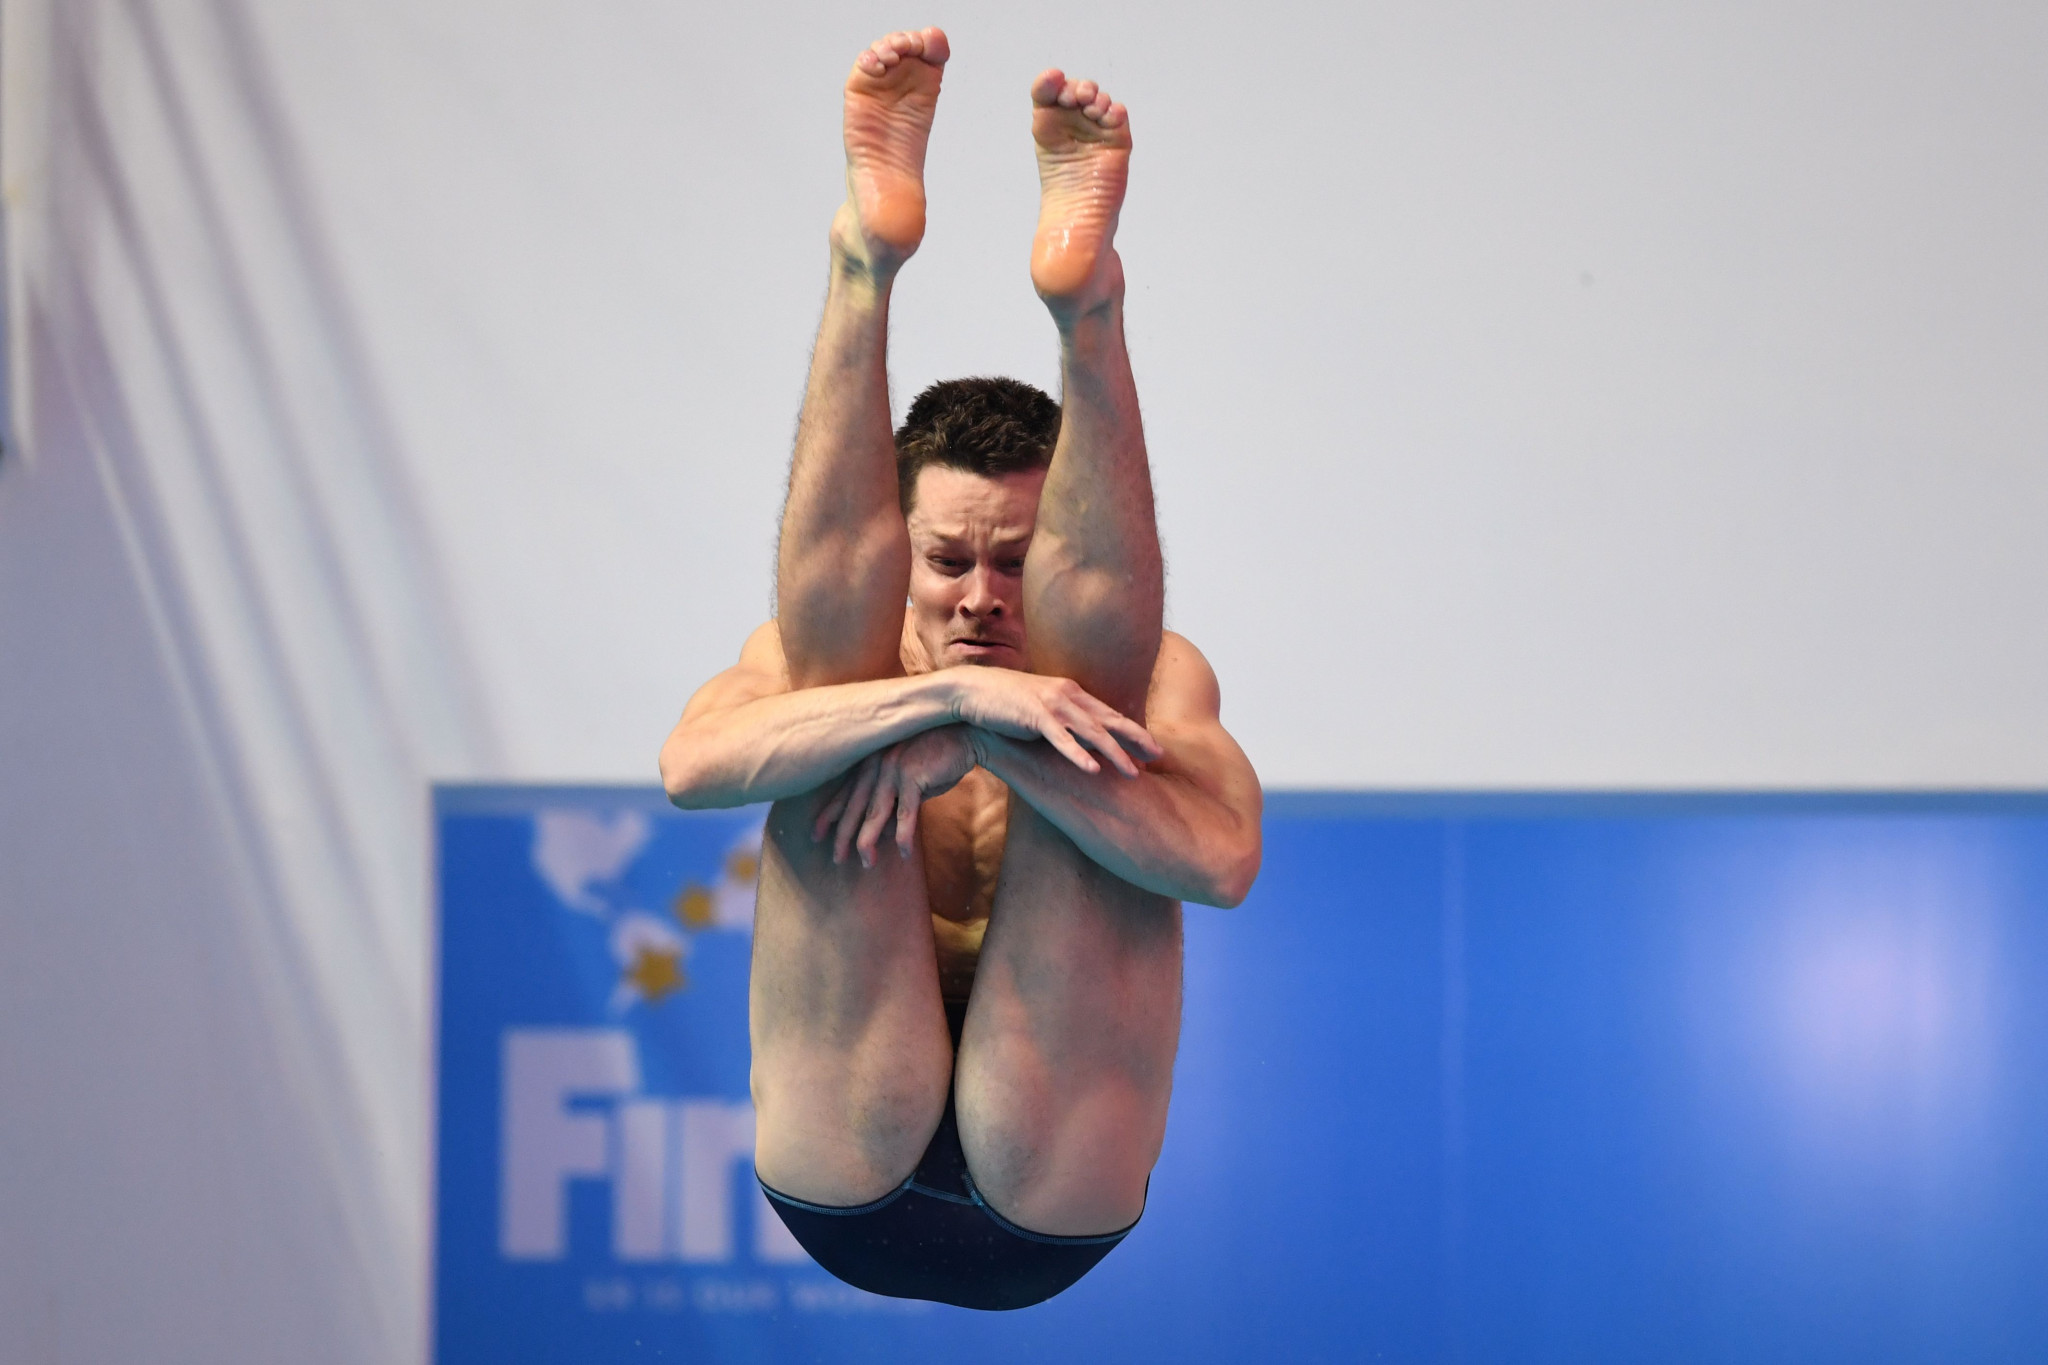 Patrick Hausding secured a 14th European Diving Championships gold medal as Germany won the mixed team event at the Liko Sports Centre in Kyiv ©Getty Images